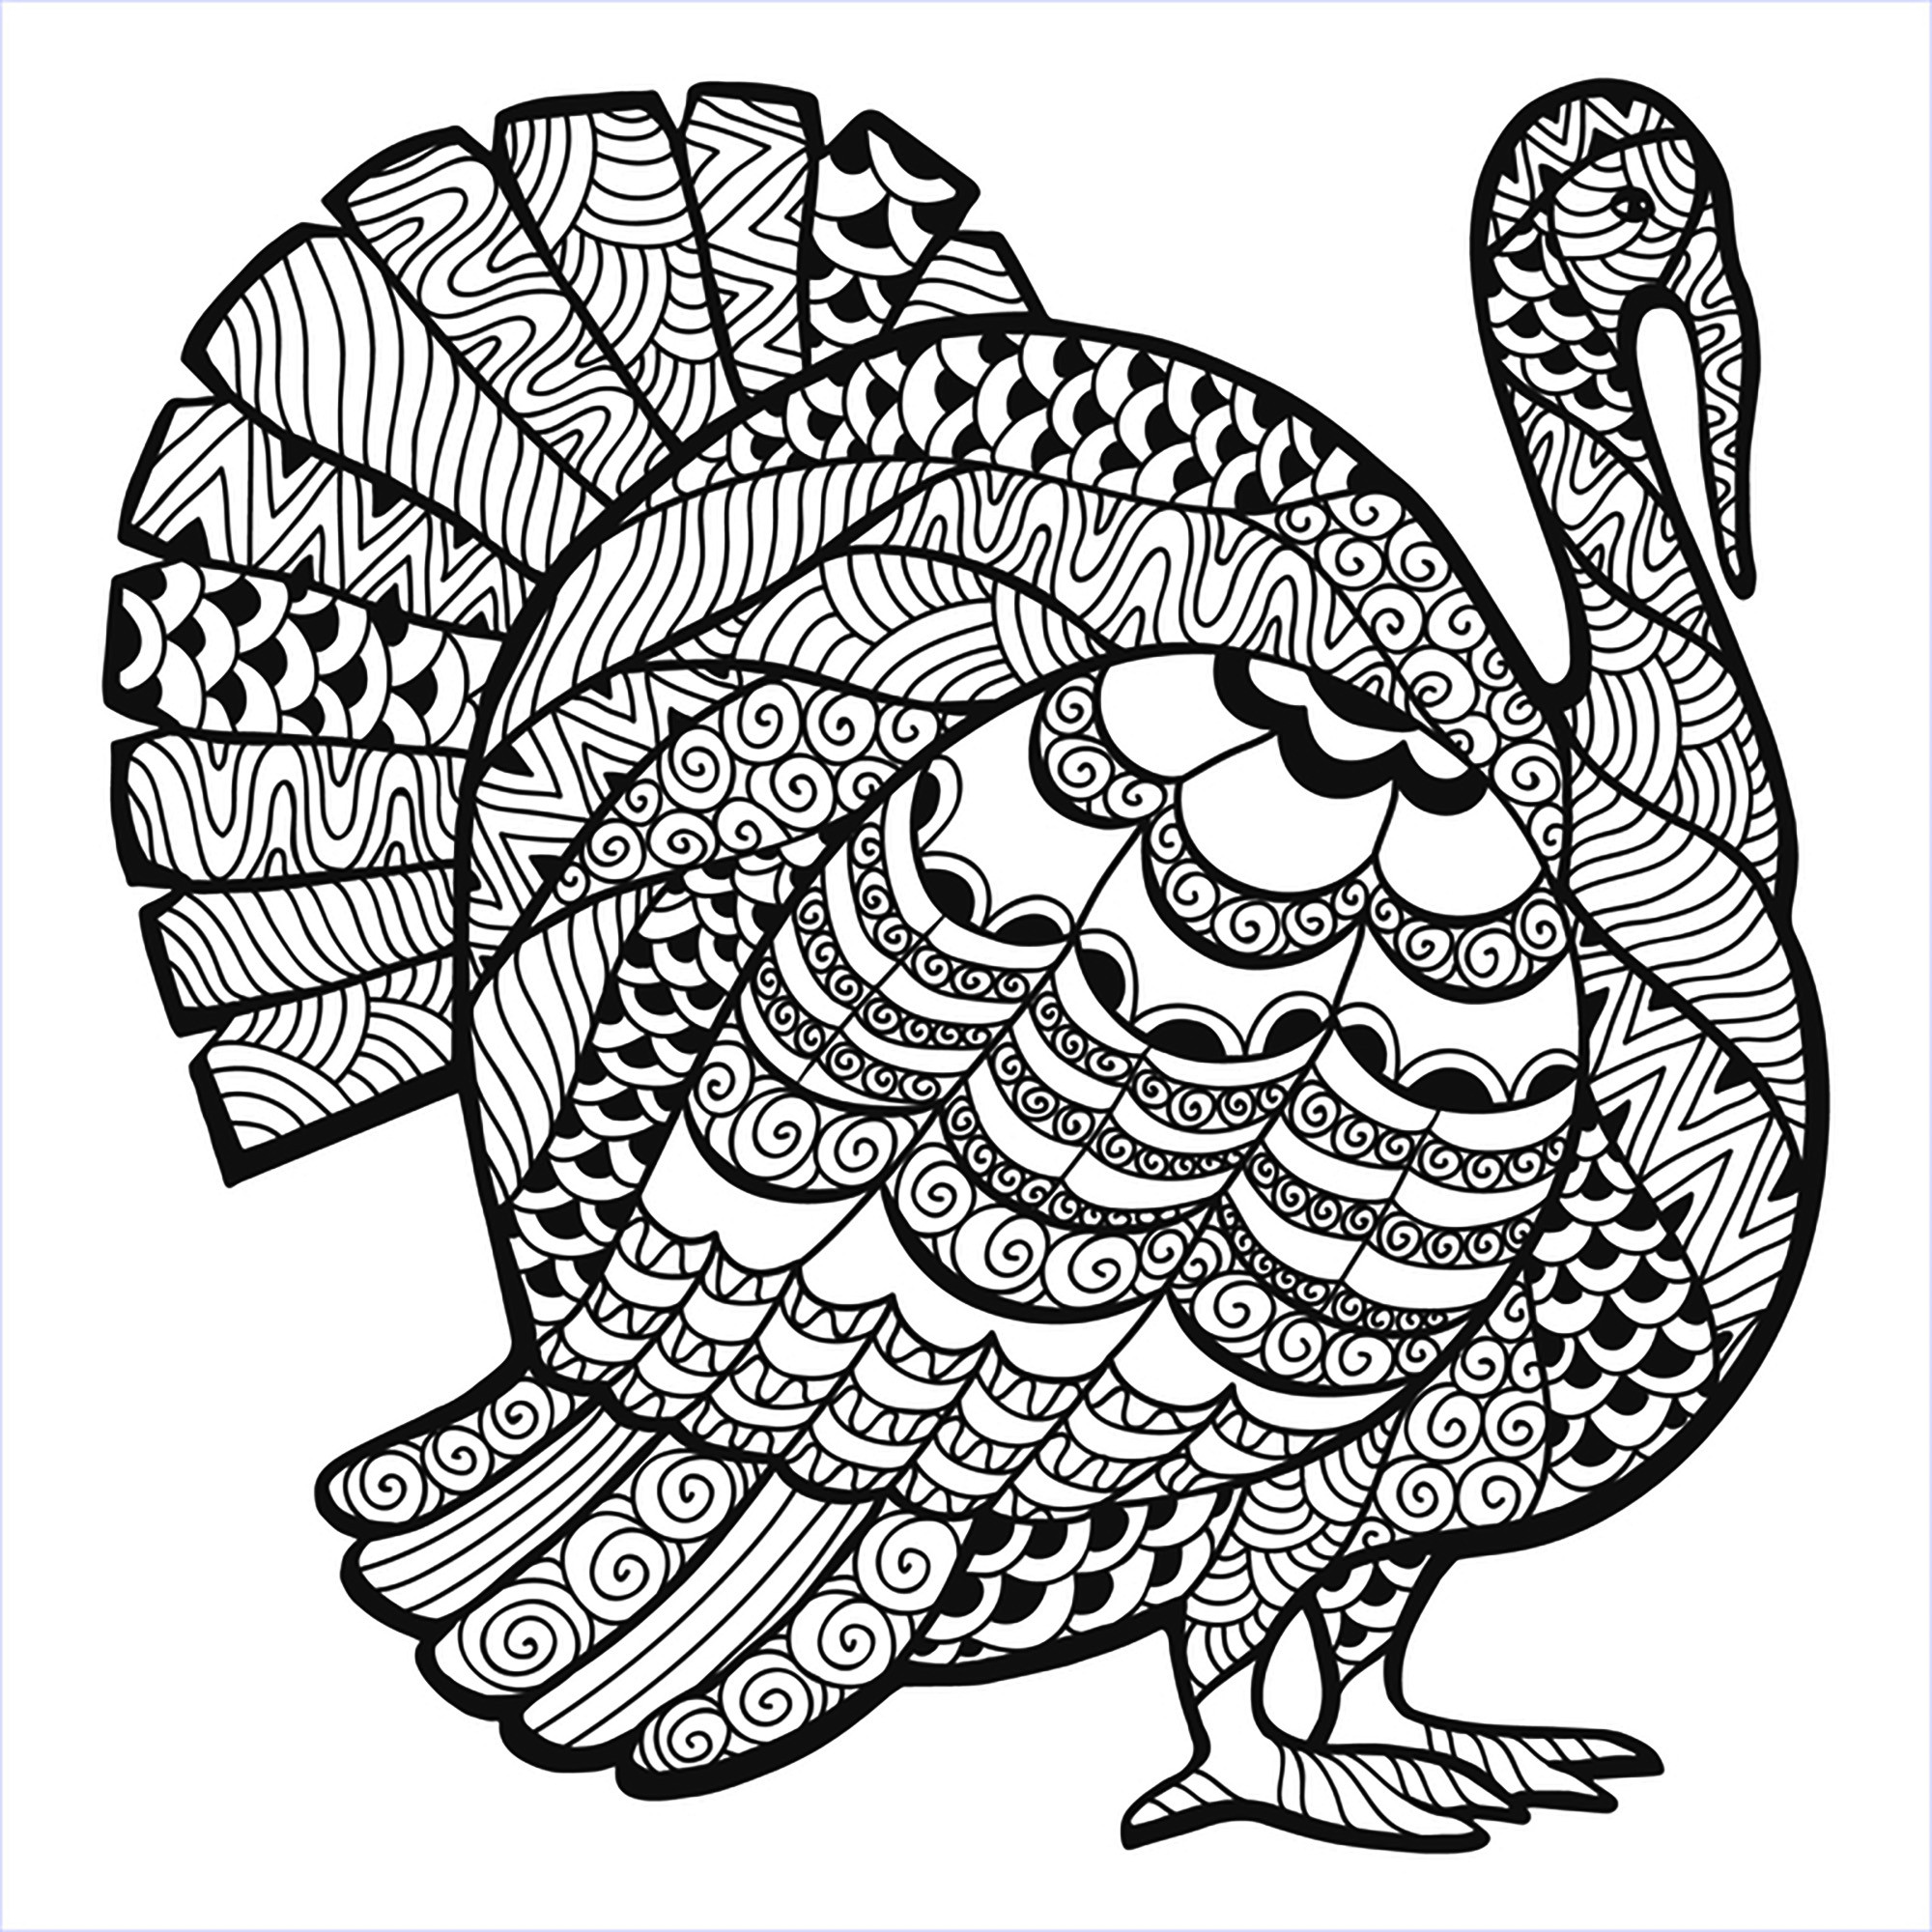 Thanksgiving Turkey Coloring Pages Printables
 Thanksgiving Coloring Pages For Adults Coloring Home